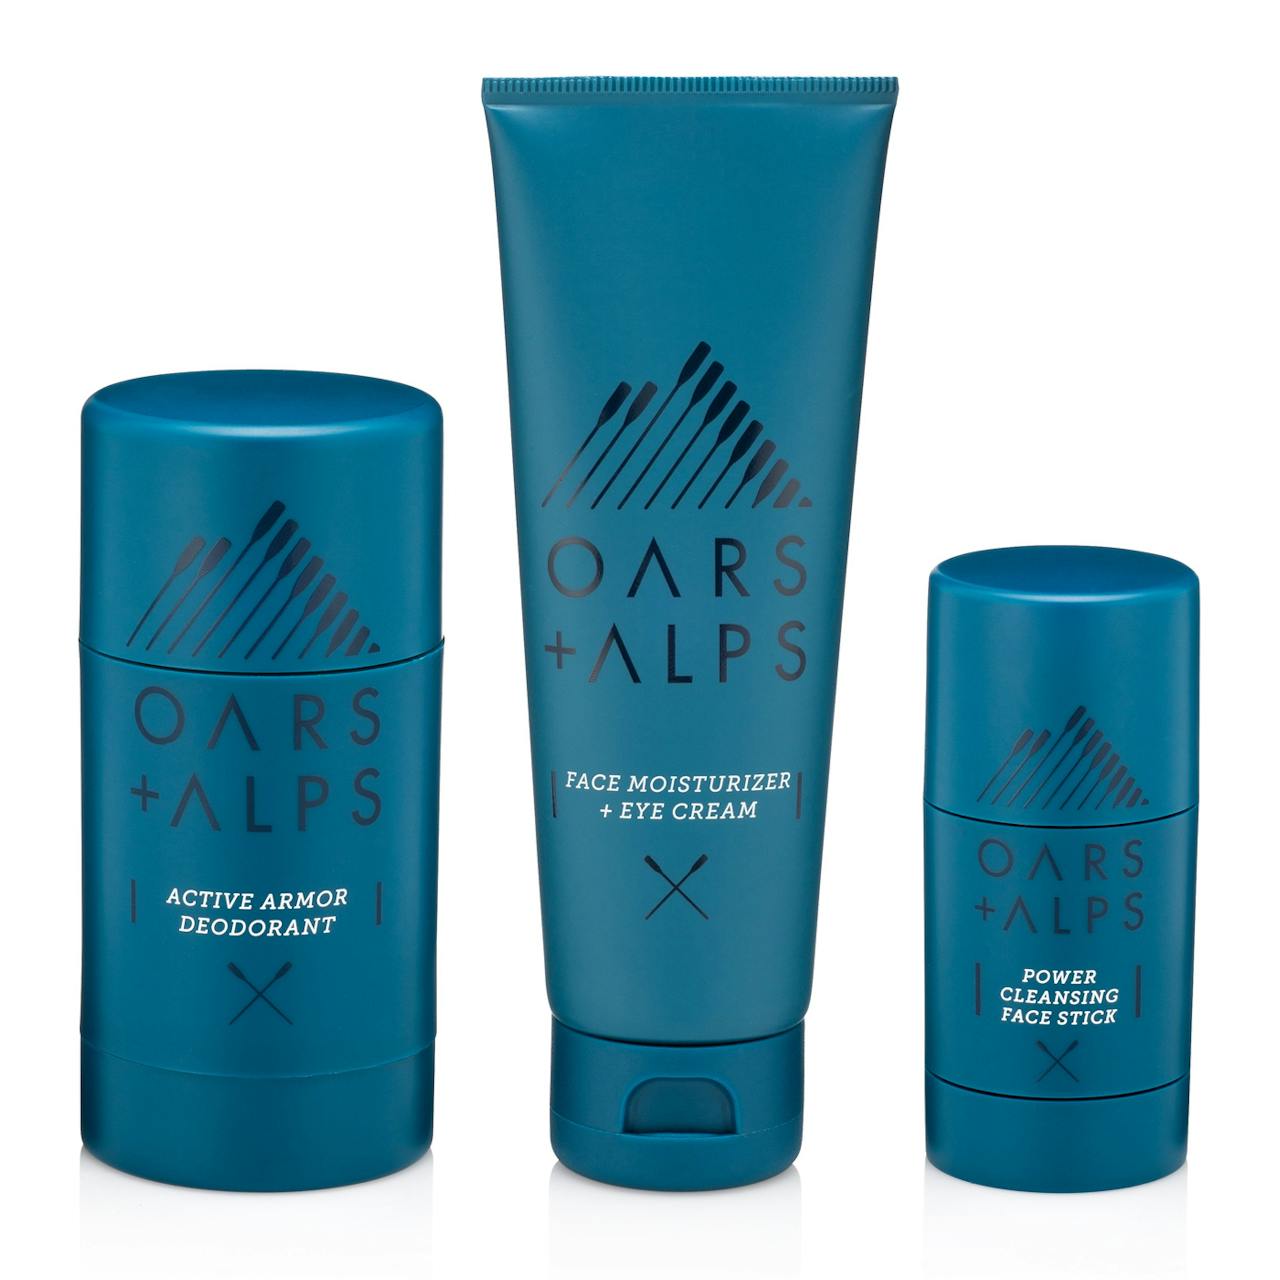 Oars and Alps Athlete's Grooming Kit